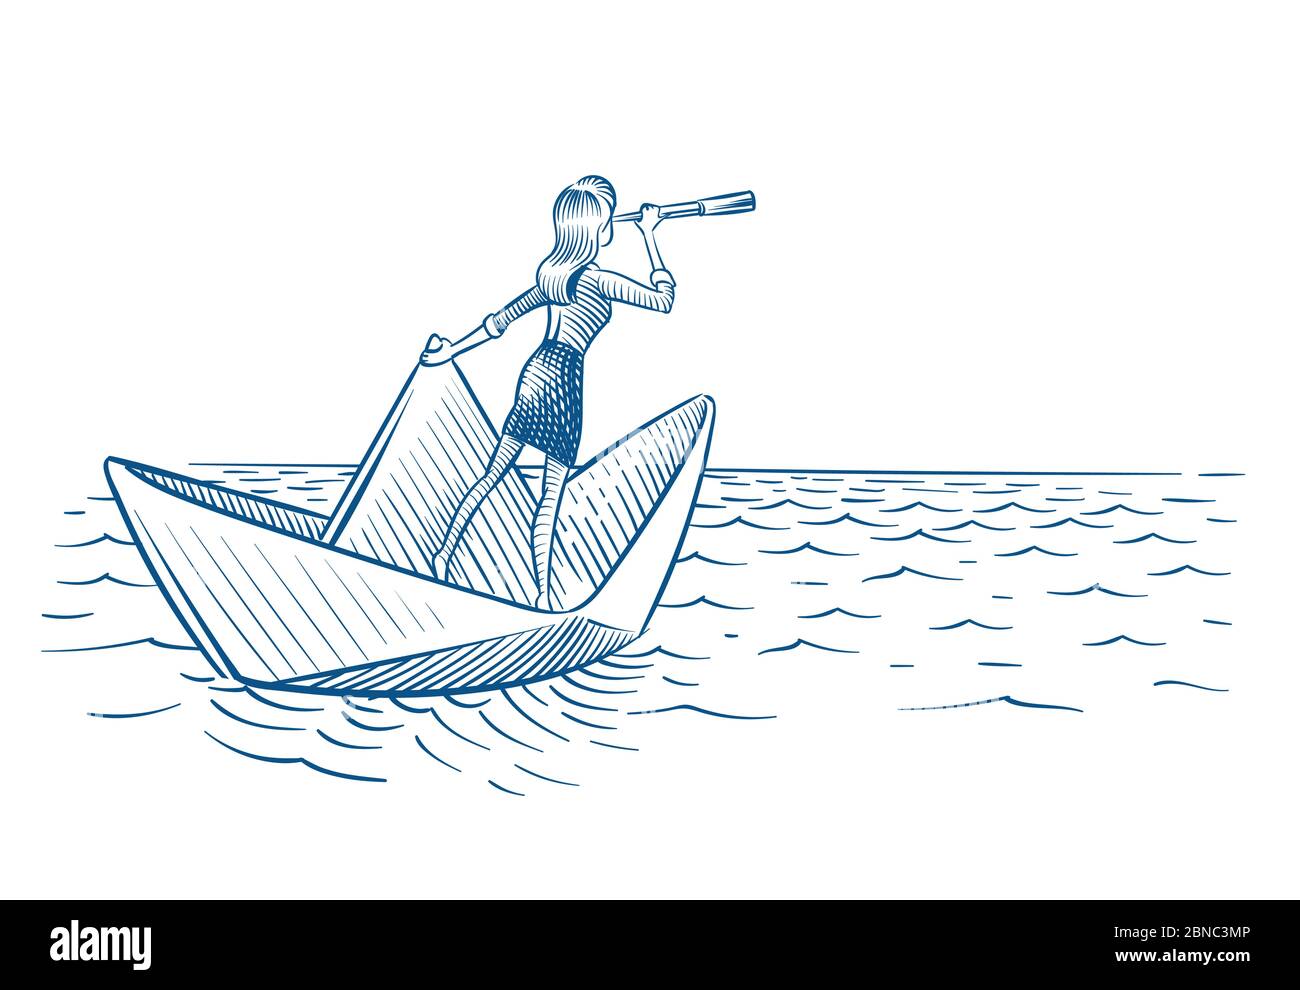 Businesswoman leader. Woman with telescope sailing on paper boat. Future career vision and leadership vector doodle concept. Illustration of leader with telescope or spyglass, businesswoman in boat Stock Vector